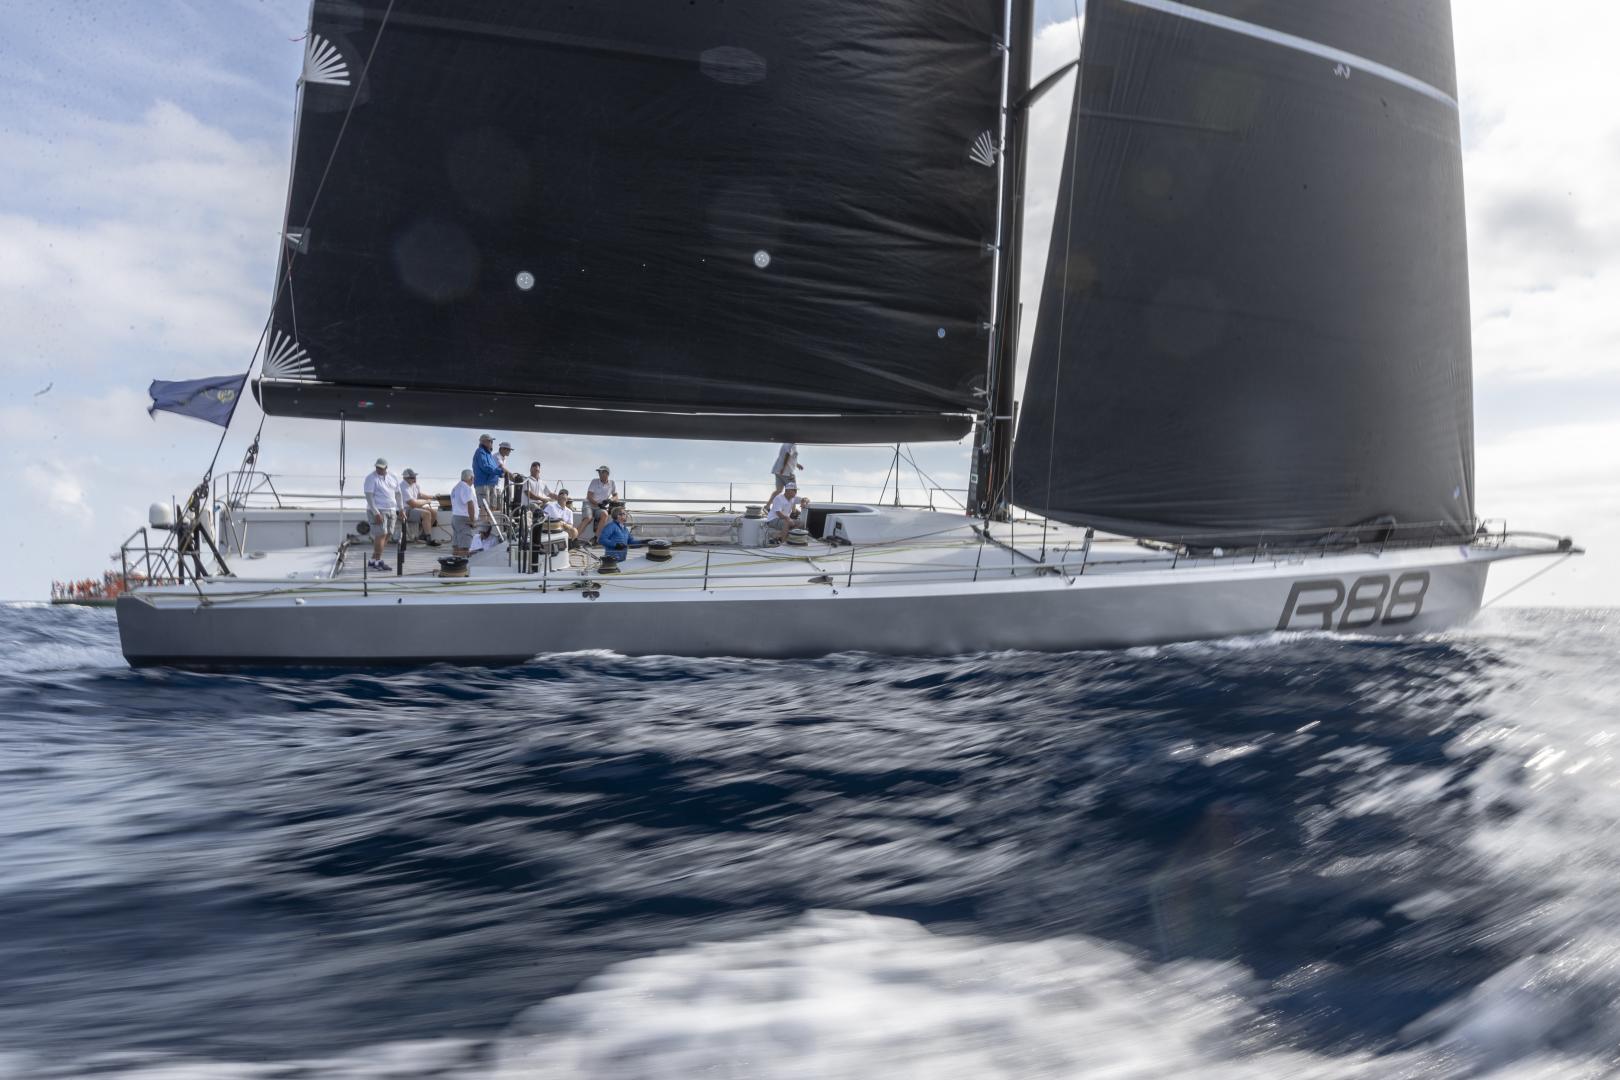 From big breeze to light, as maxi racing gets underway at Les Voiles de Saint-Tropez